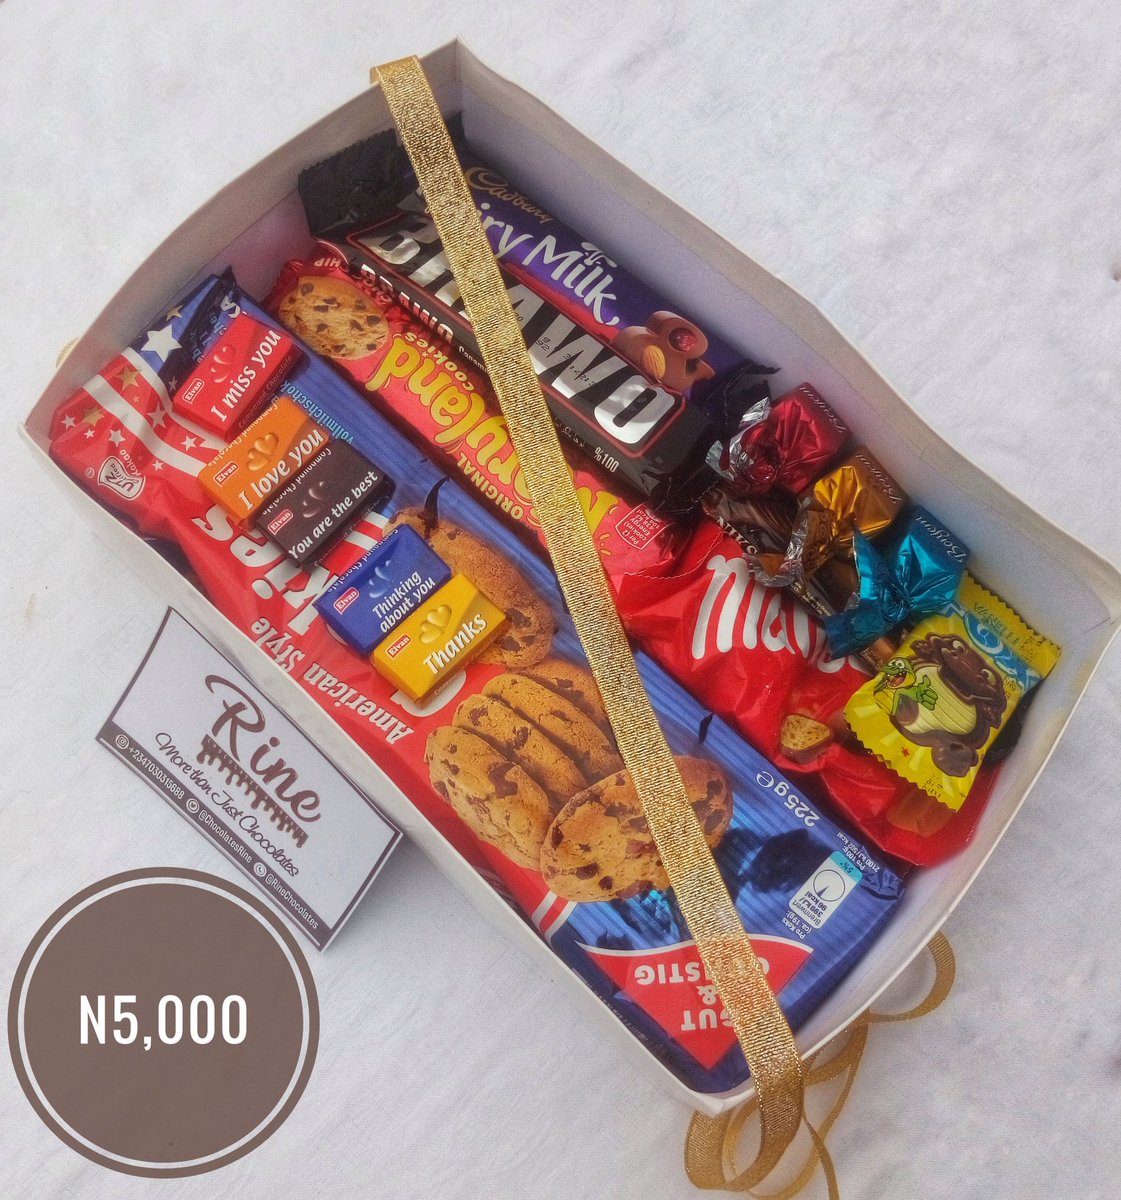 These are other types of our CHOCOLATE ENJOYMENT BOX.It is 5,000 naira. It could be curated to suit your preference as well.